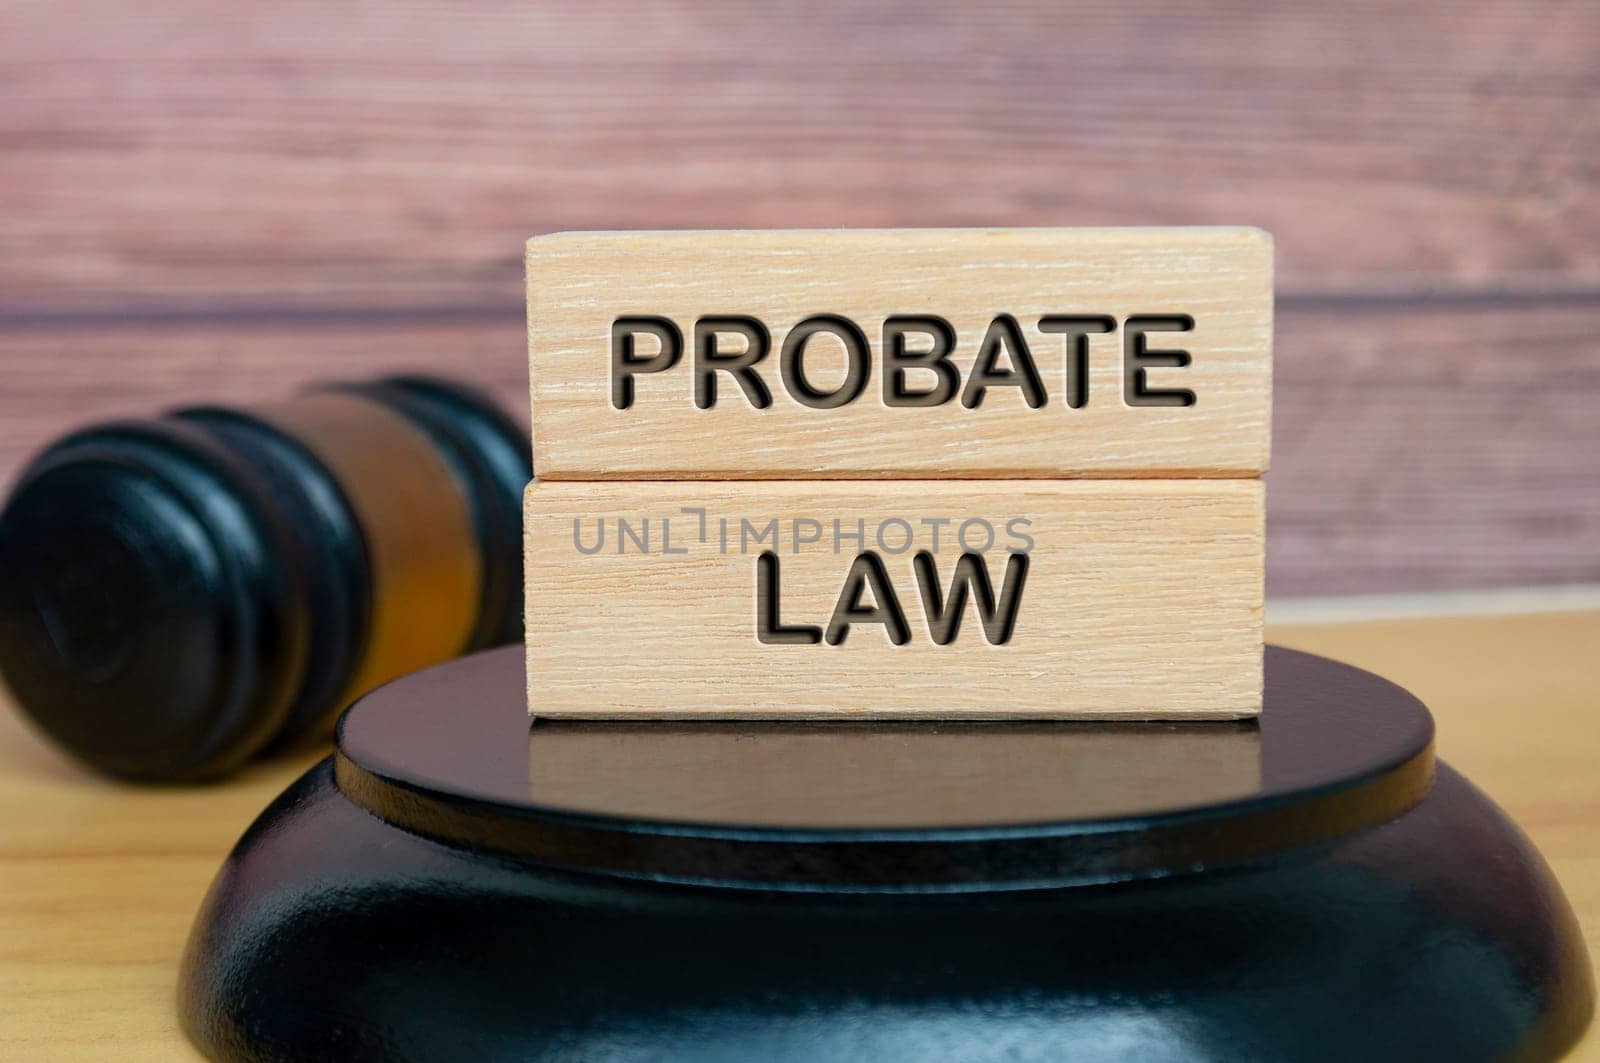 Probate law text engraved on wooden block with gavel background. Legal and law concept. by yom98